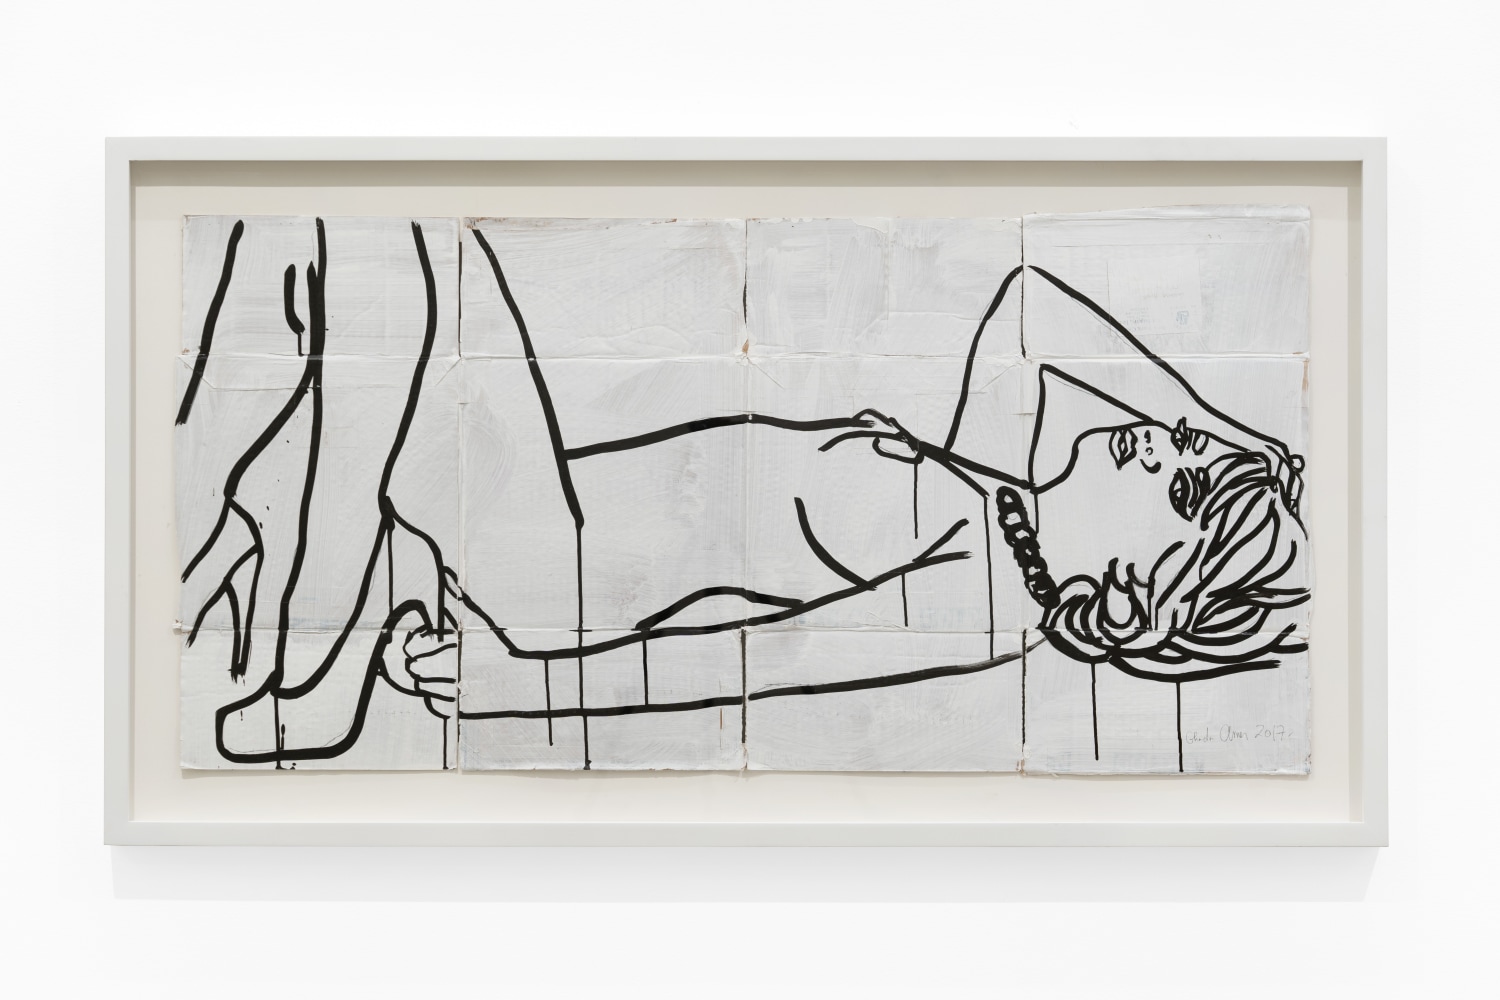 Ghada Amer (b. 1963)

Study for Paysage avec Odalisque, 2017

Acrylic and ink on cardboard

25 x 49 7/8 inches

126.7 x 63.5 cm